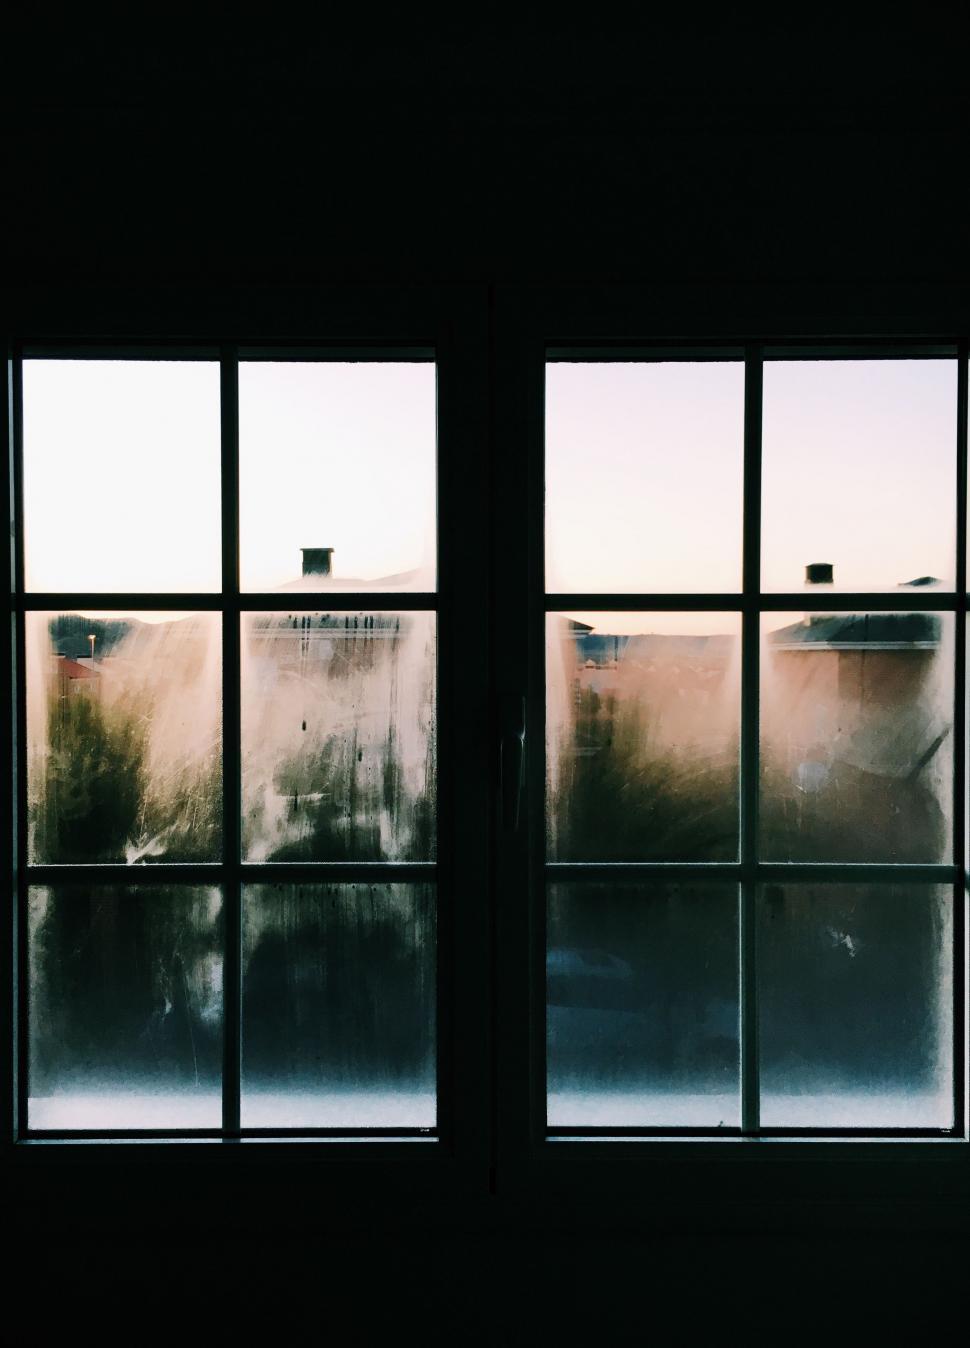 Free Image of Window With a View of a Building 